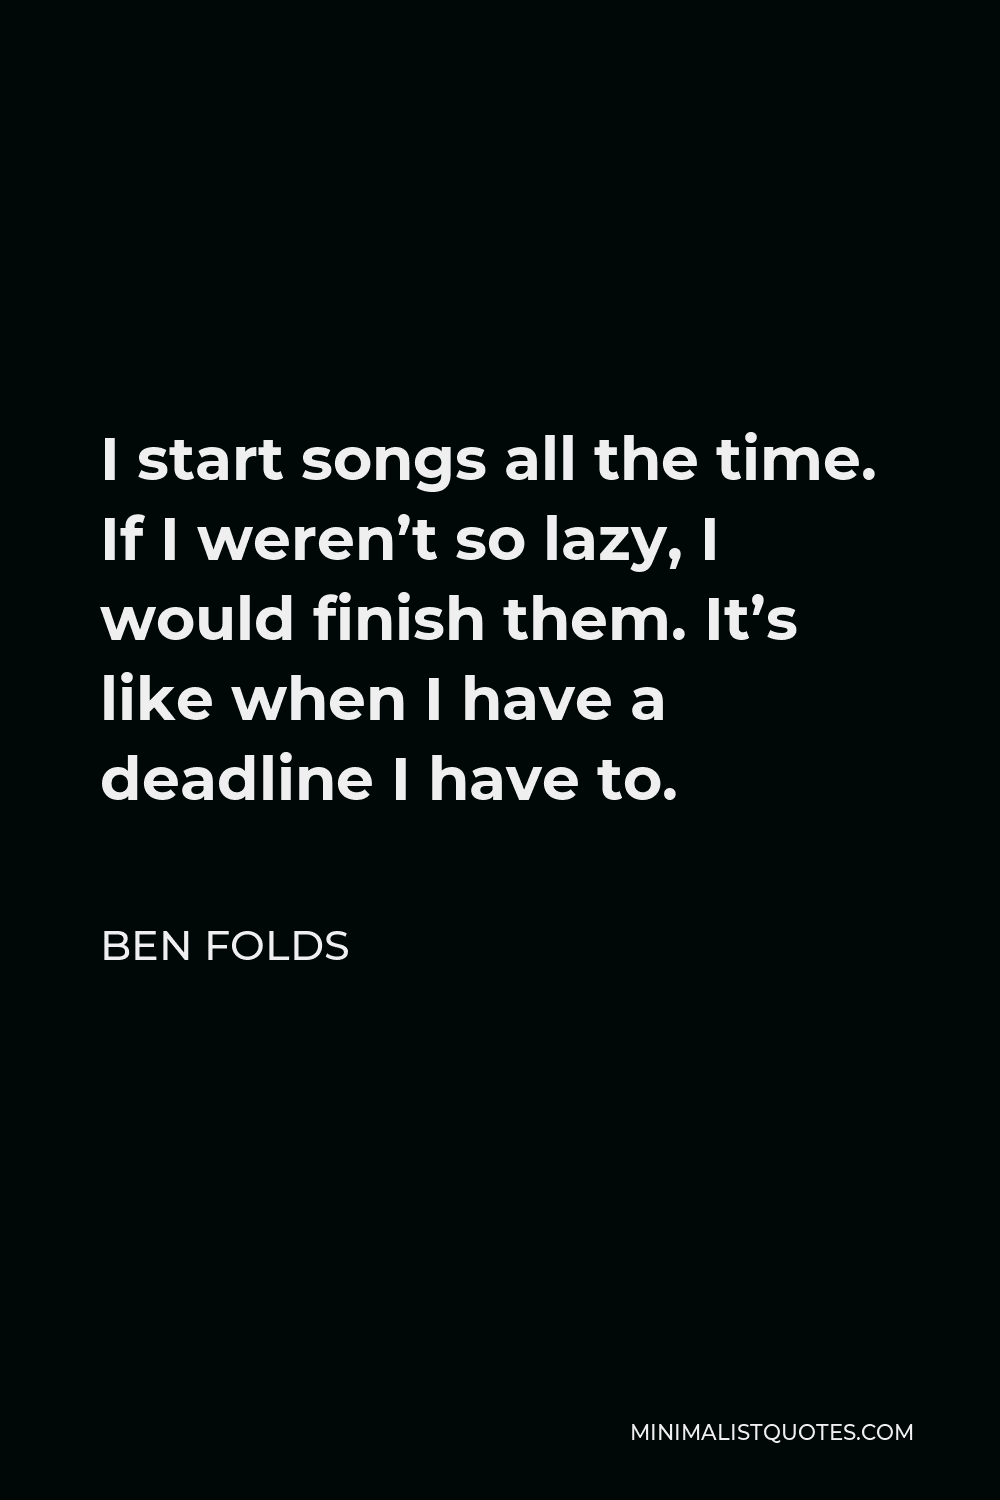 Ben Folds Quote - I start songs all the time. If I weren’t so lazy, I would finish them. It’s like when I have a deadline I have to.